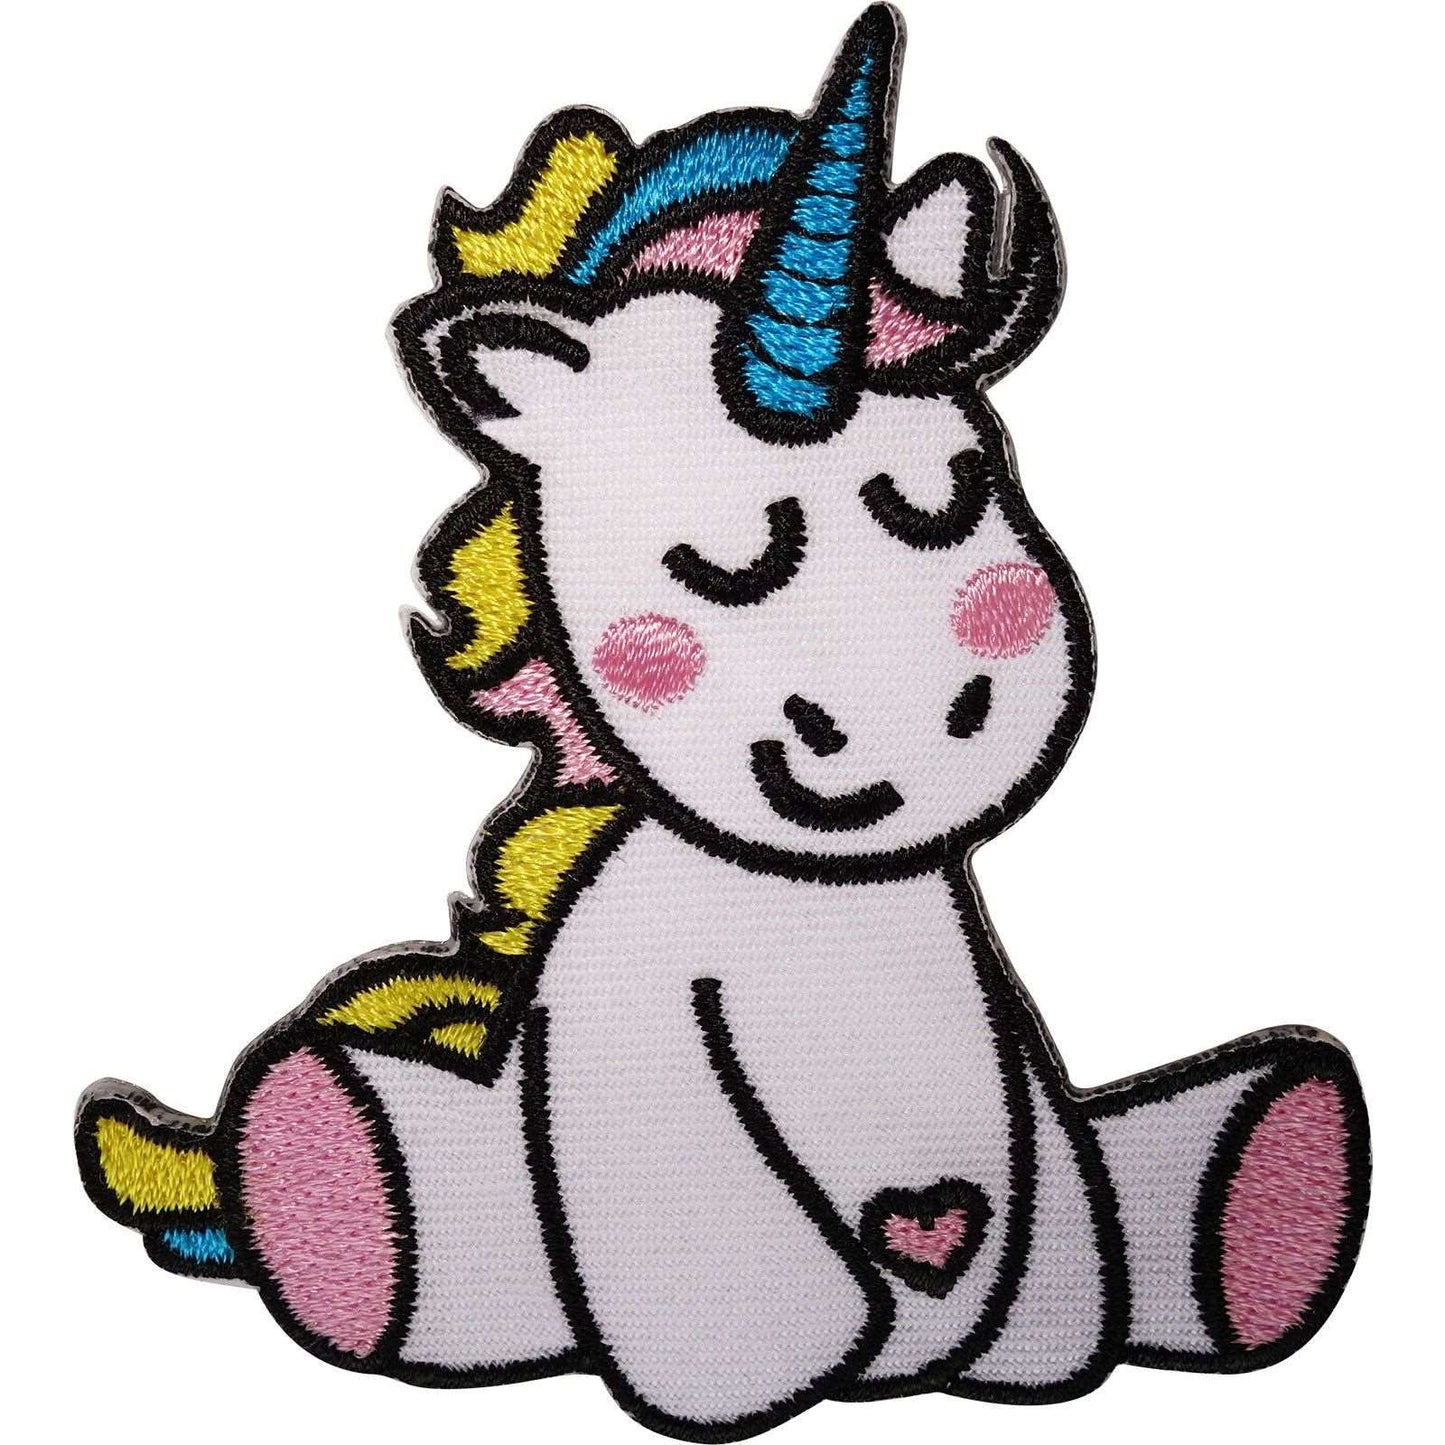 Baby Unicorn Patch Iron Sew On Pony Horse Embroidered Badge Embroidery Applique